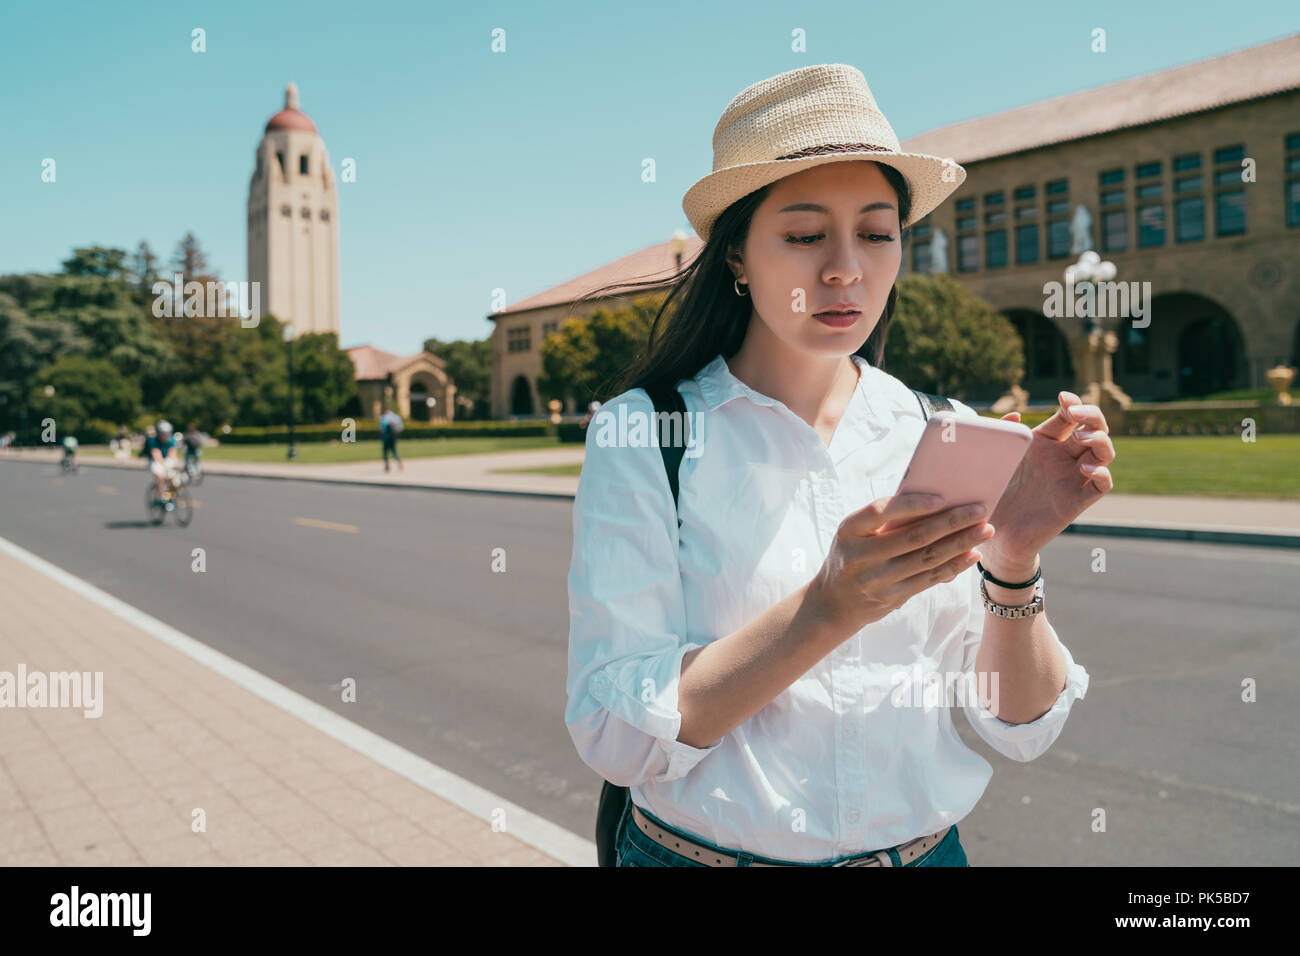 stylish woman using a smartphone and looking lost for not sure where she is going to. Stock Photo